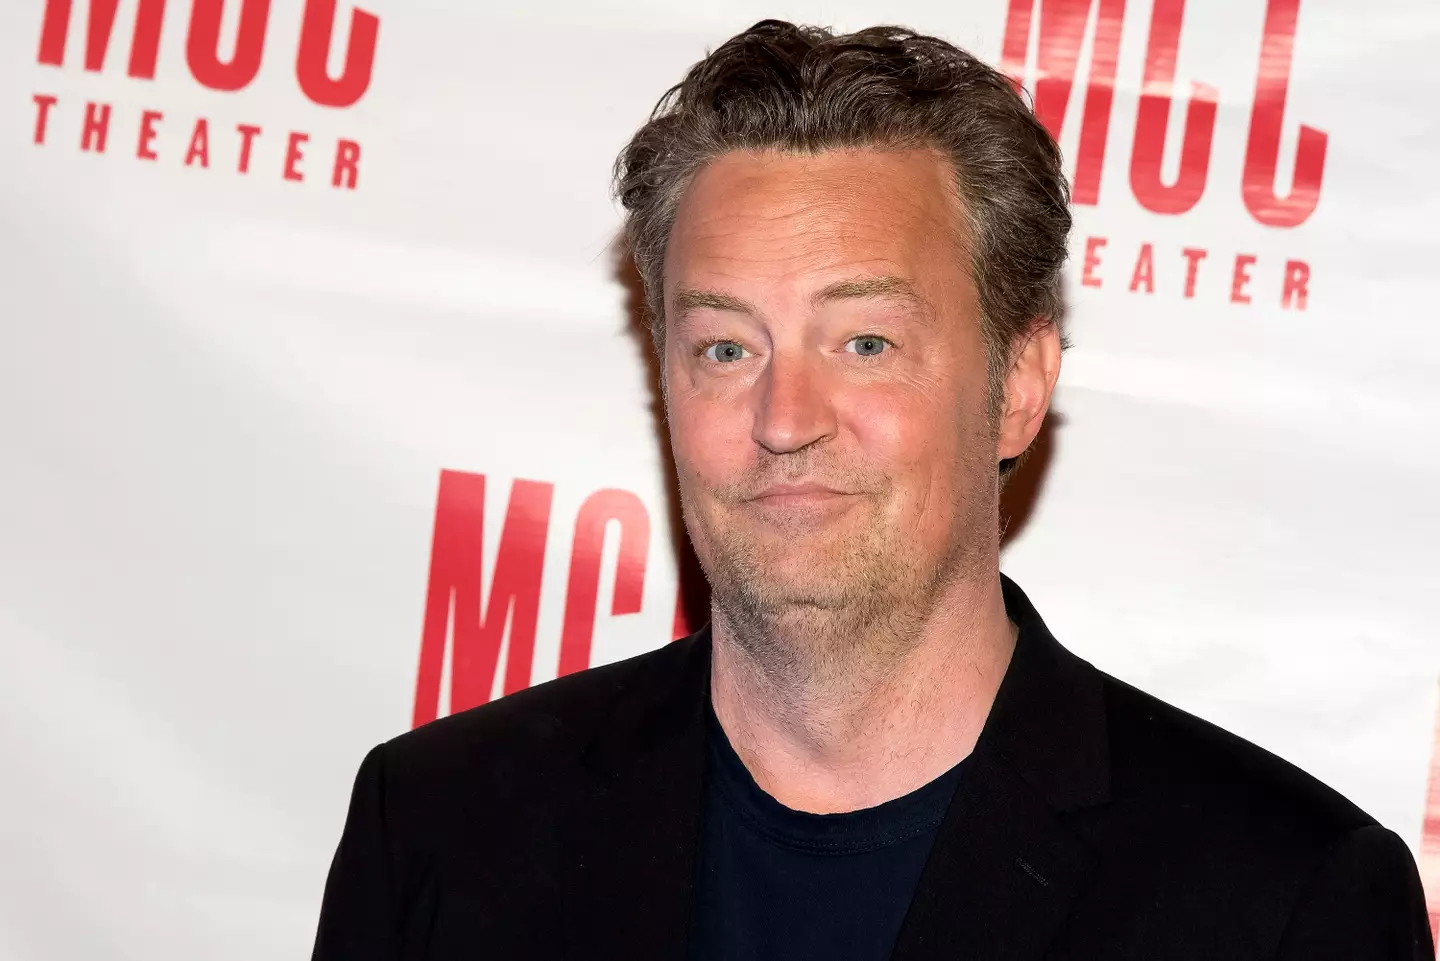 Matthew Perry was determined to help others stay sober.